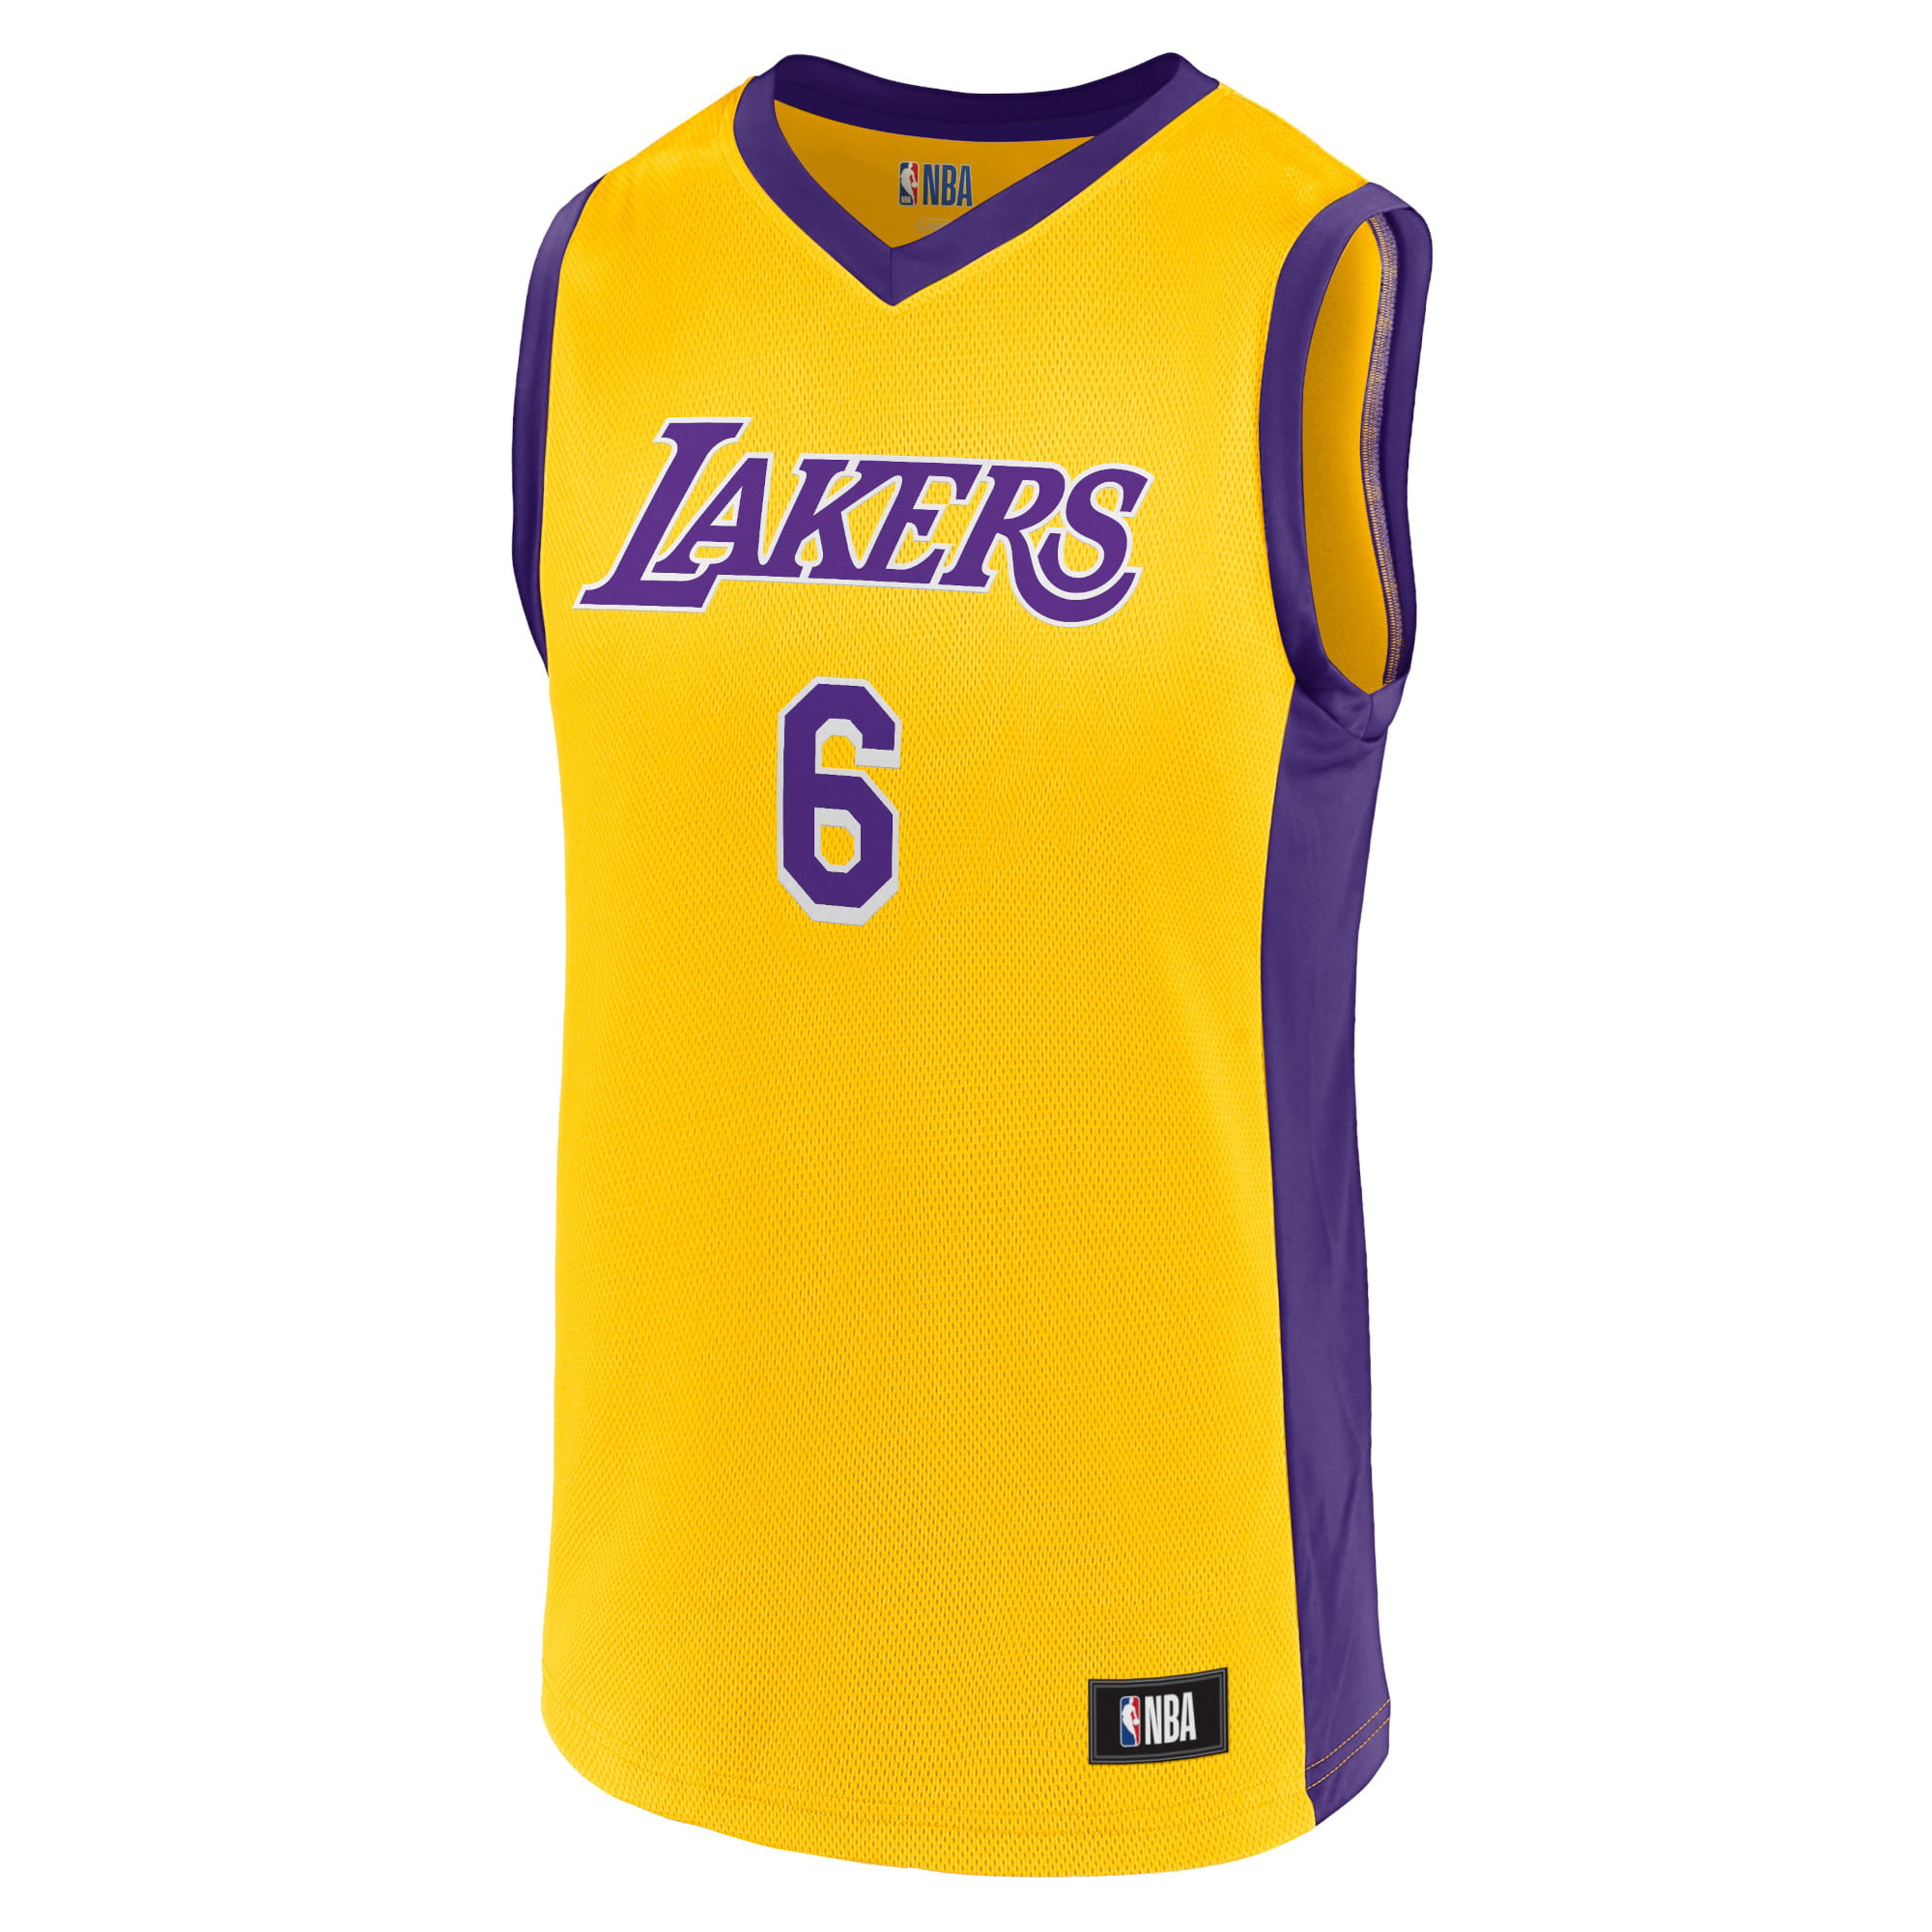 Nba Los Angeles Lakers L.A. Lakers Team Jersey purple white